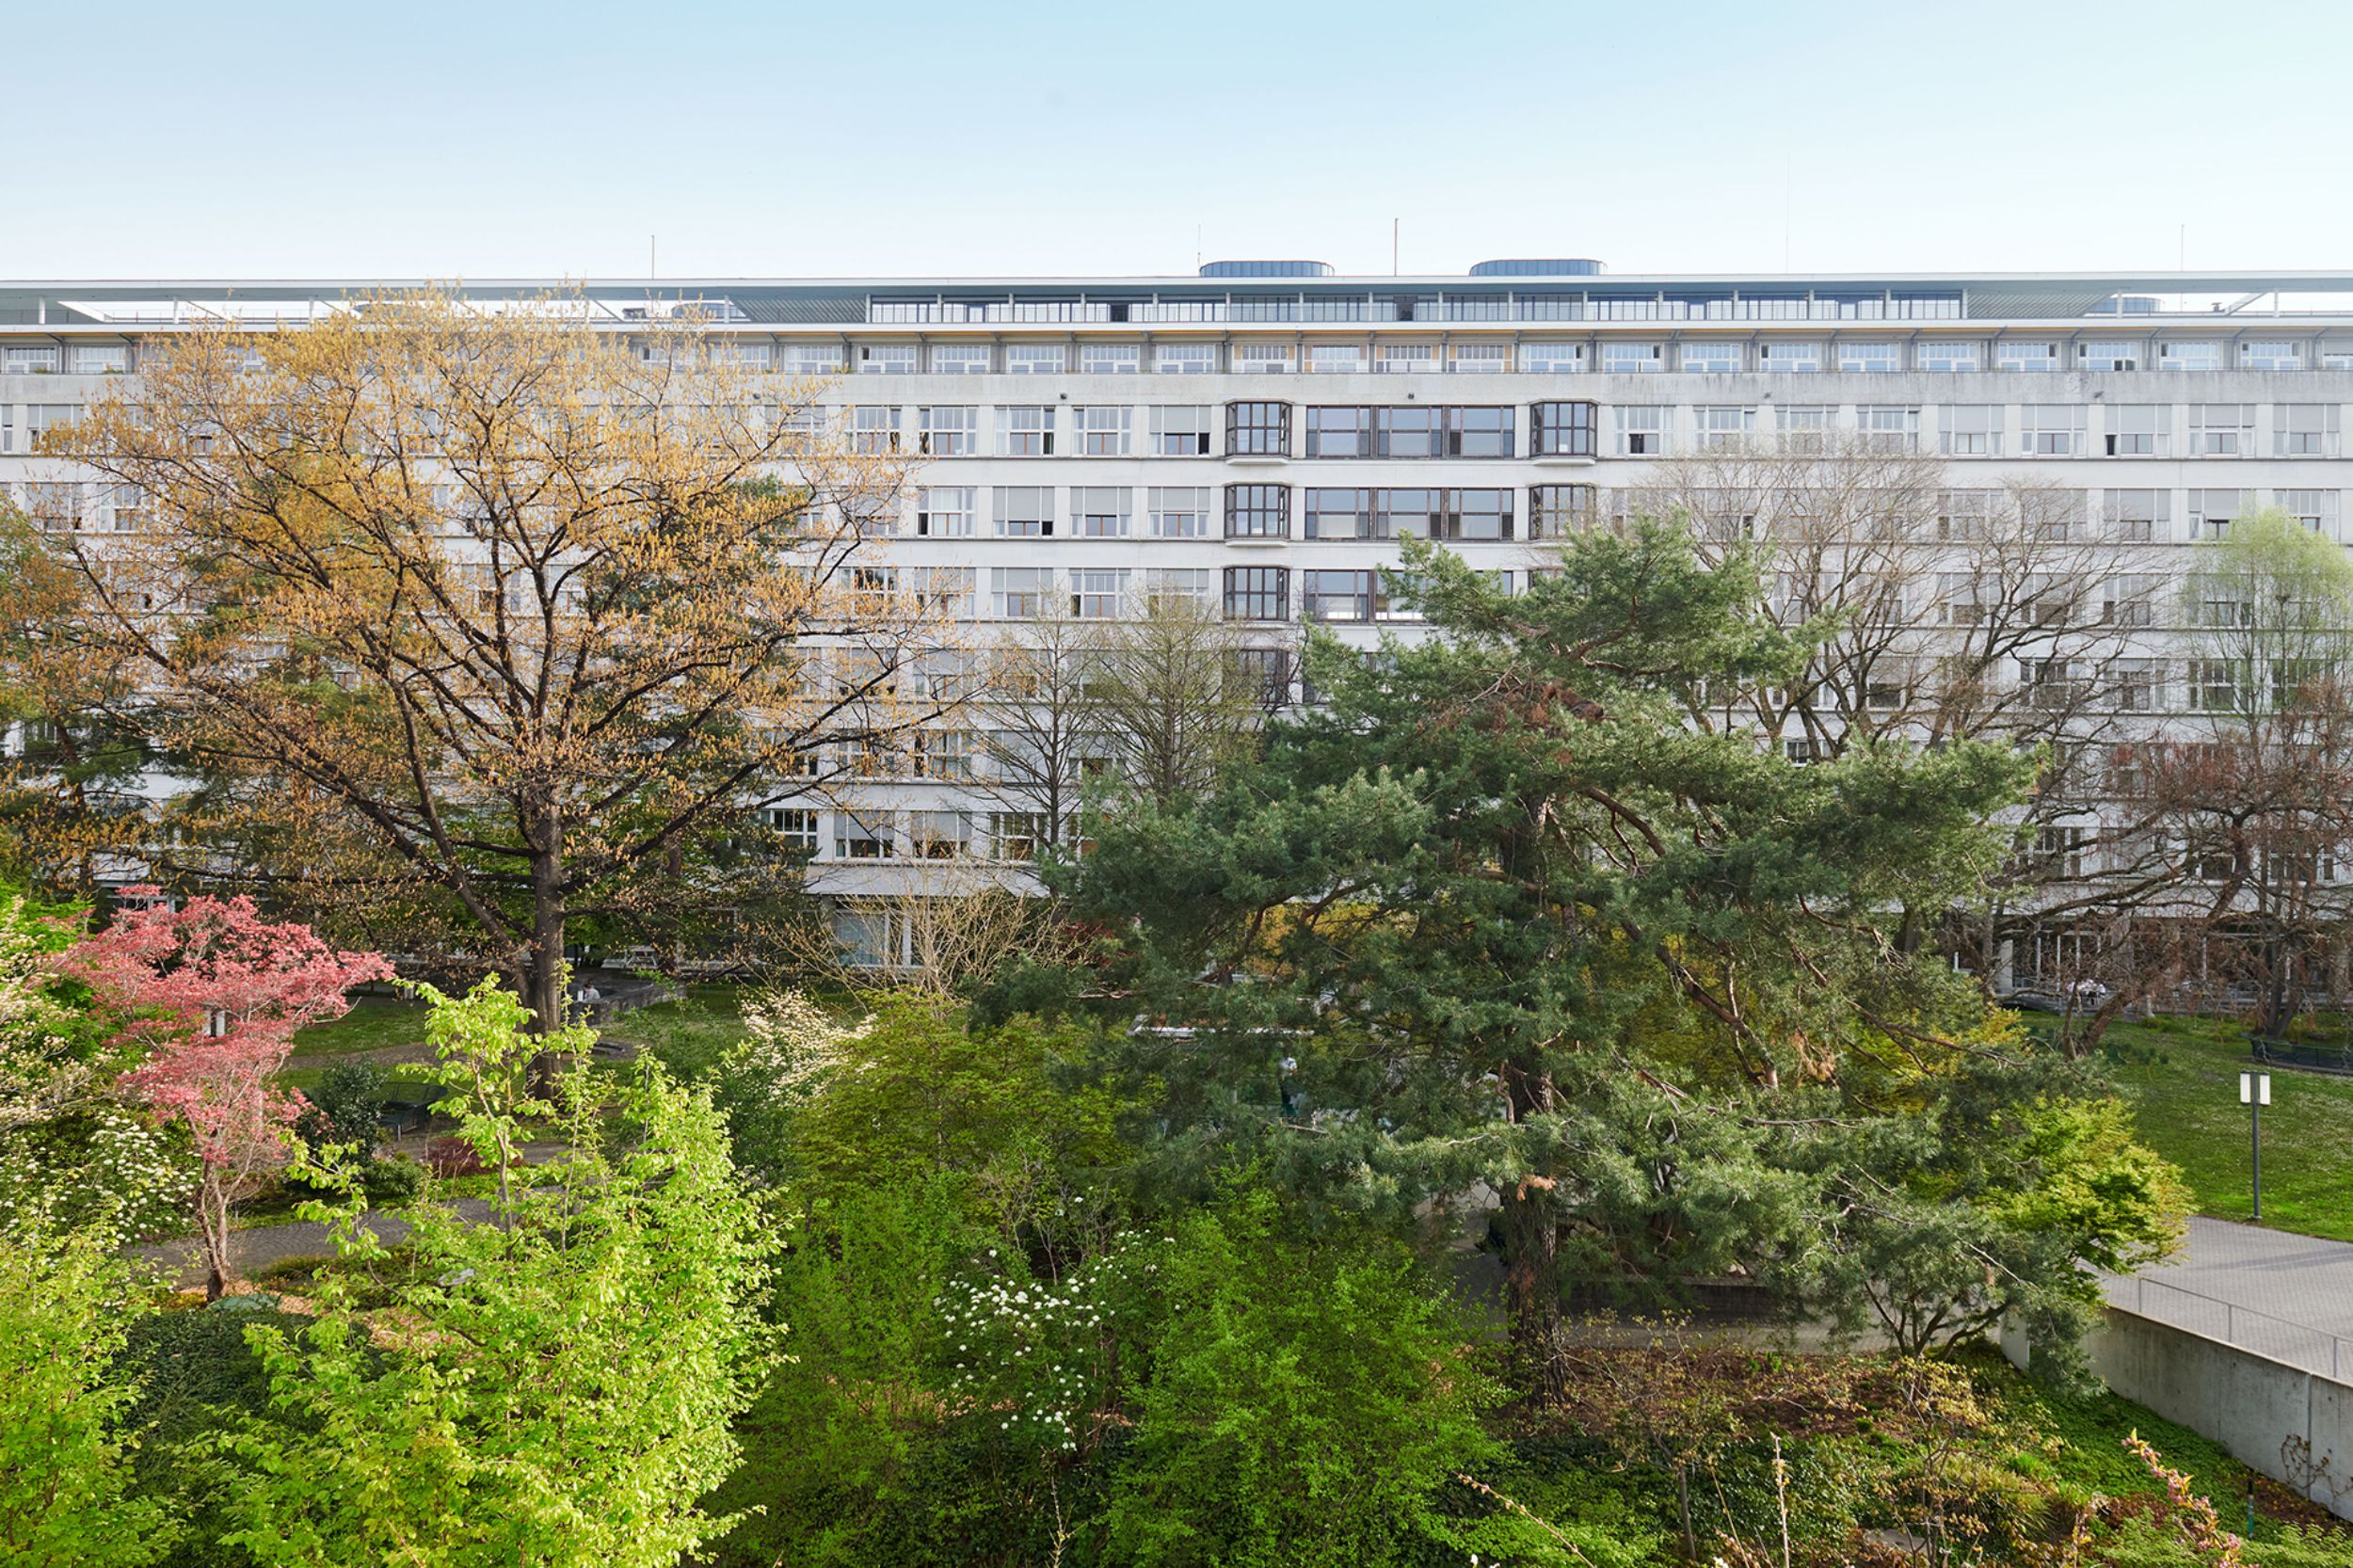 Clinic 1 of the University Hospital Basel, seen from the inner courtyard